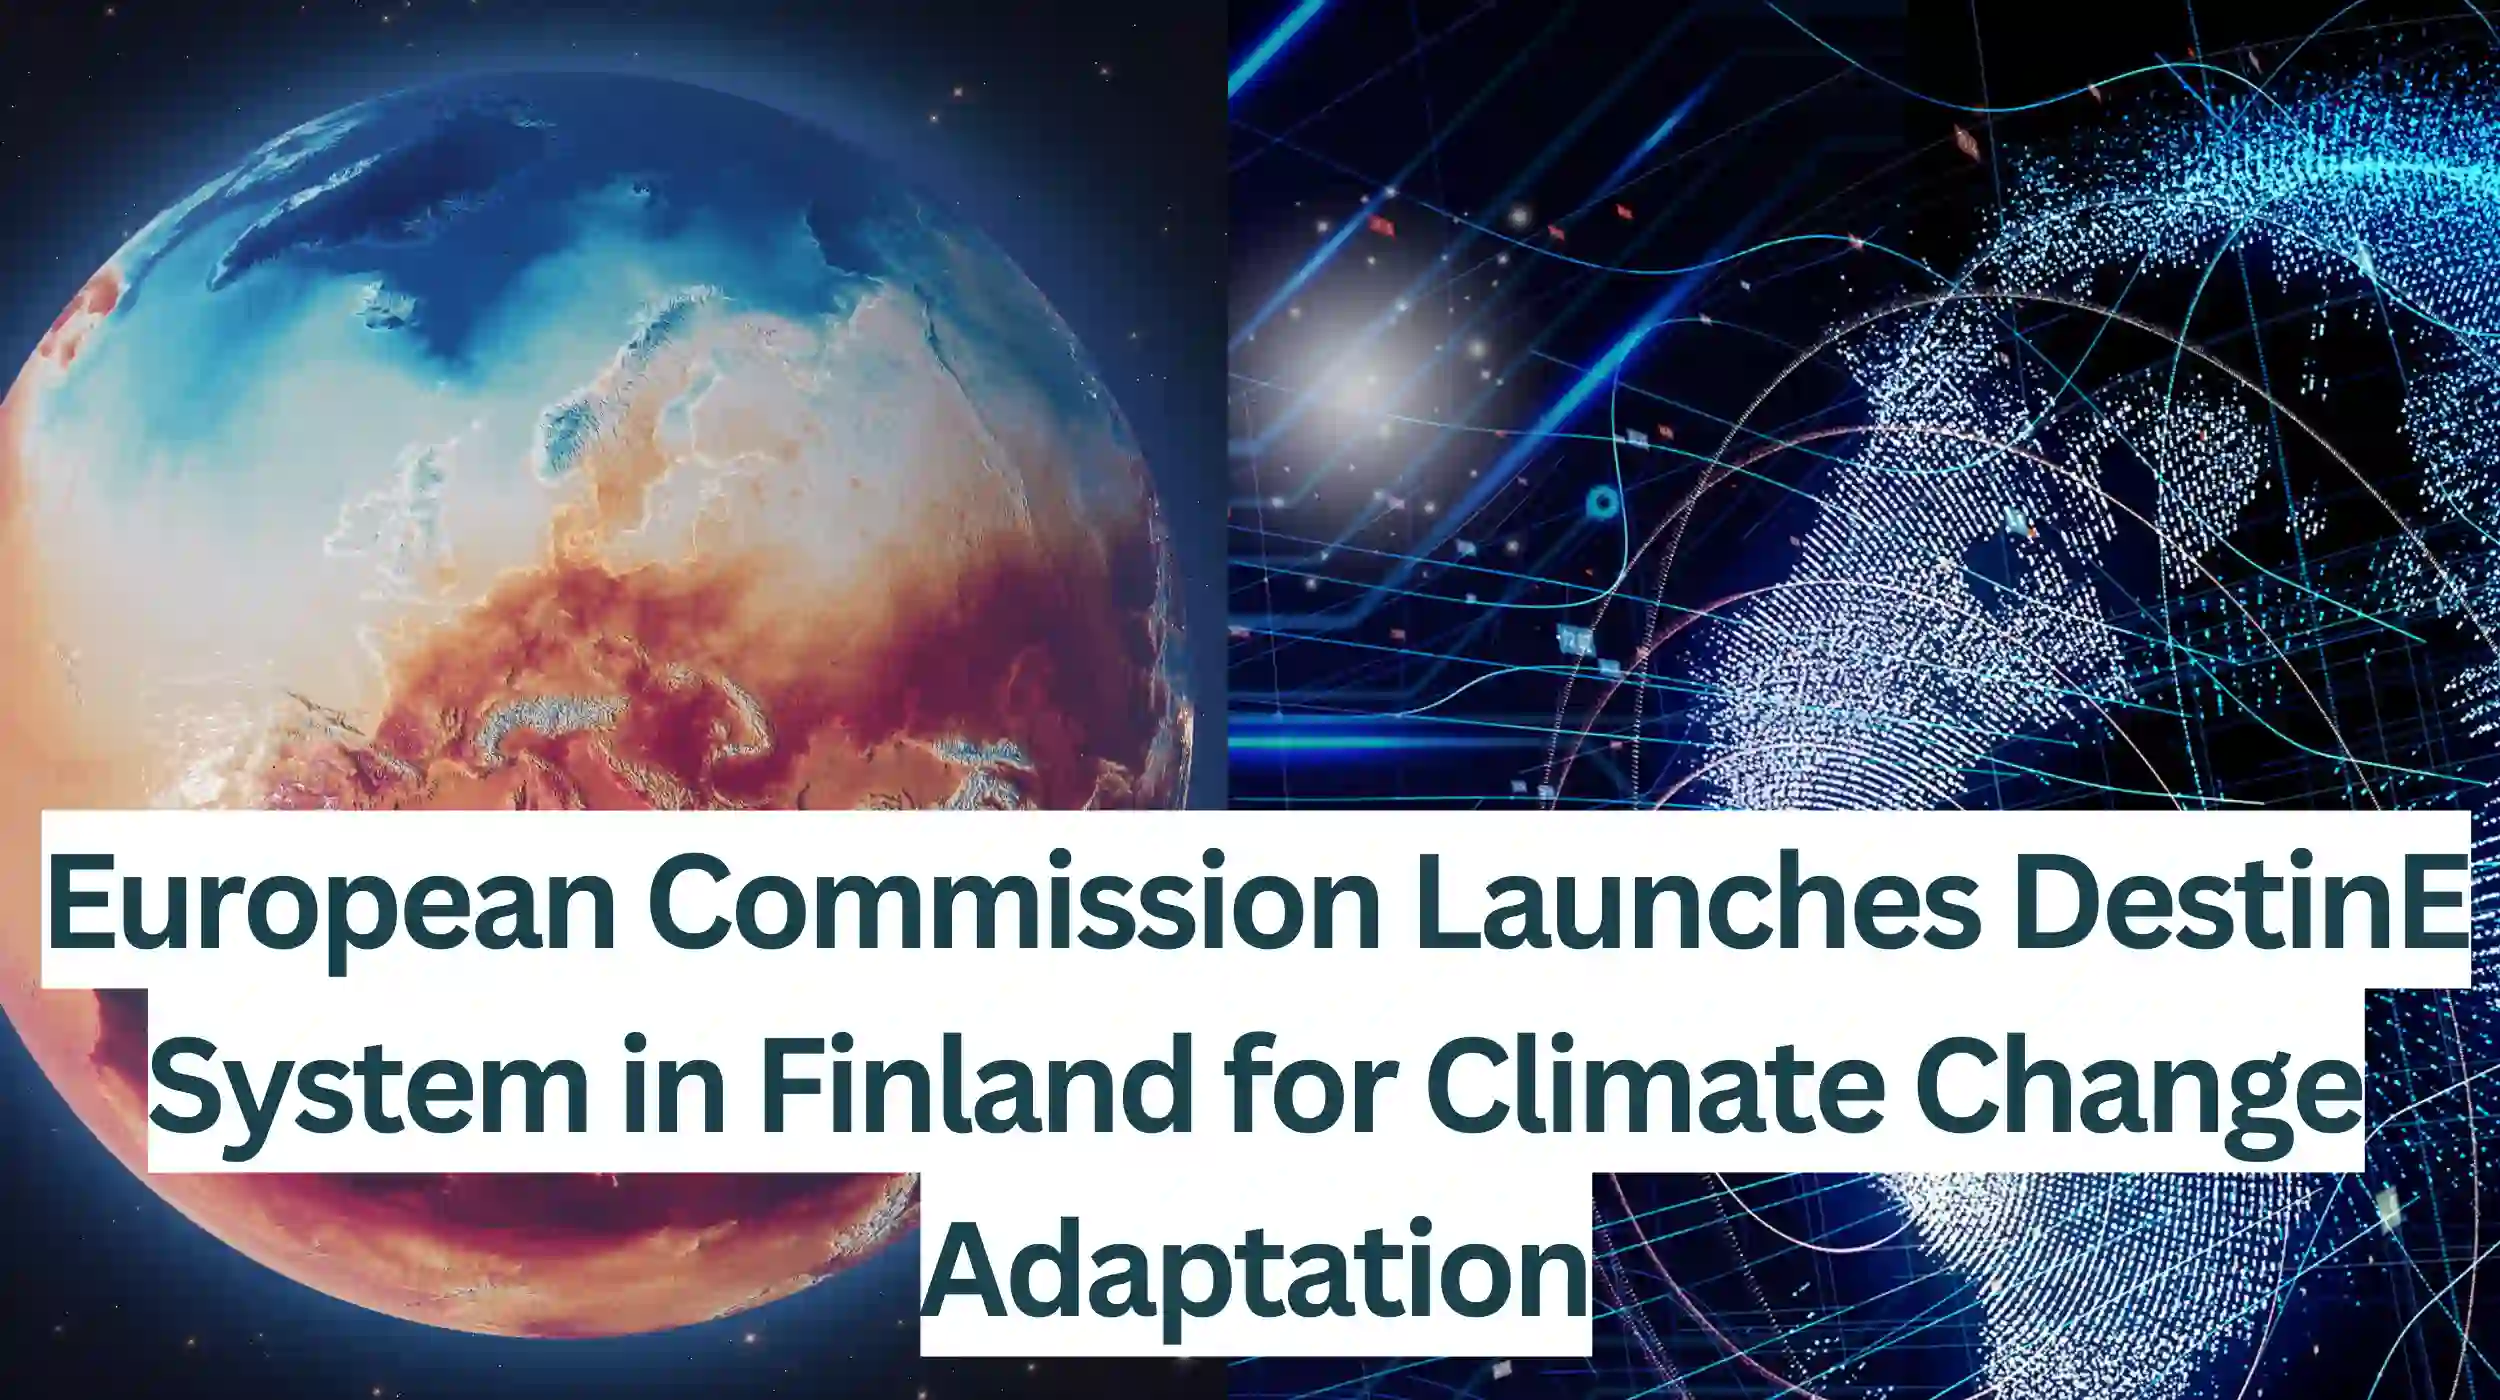 European-Commission-Launches-DestinE-System-in-Finland